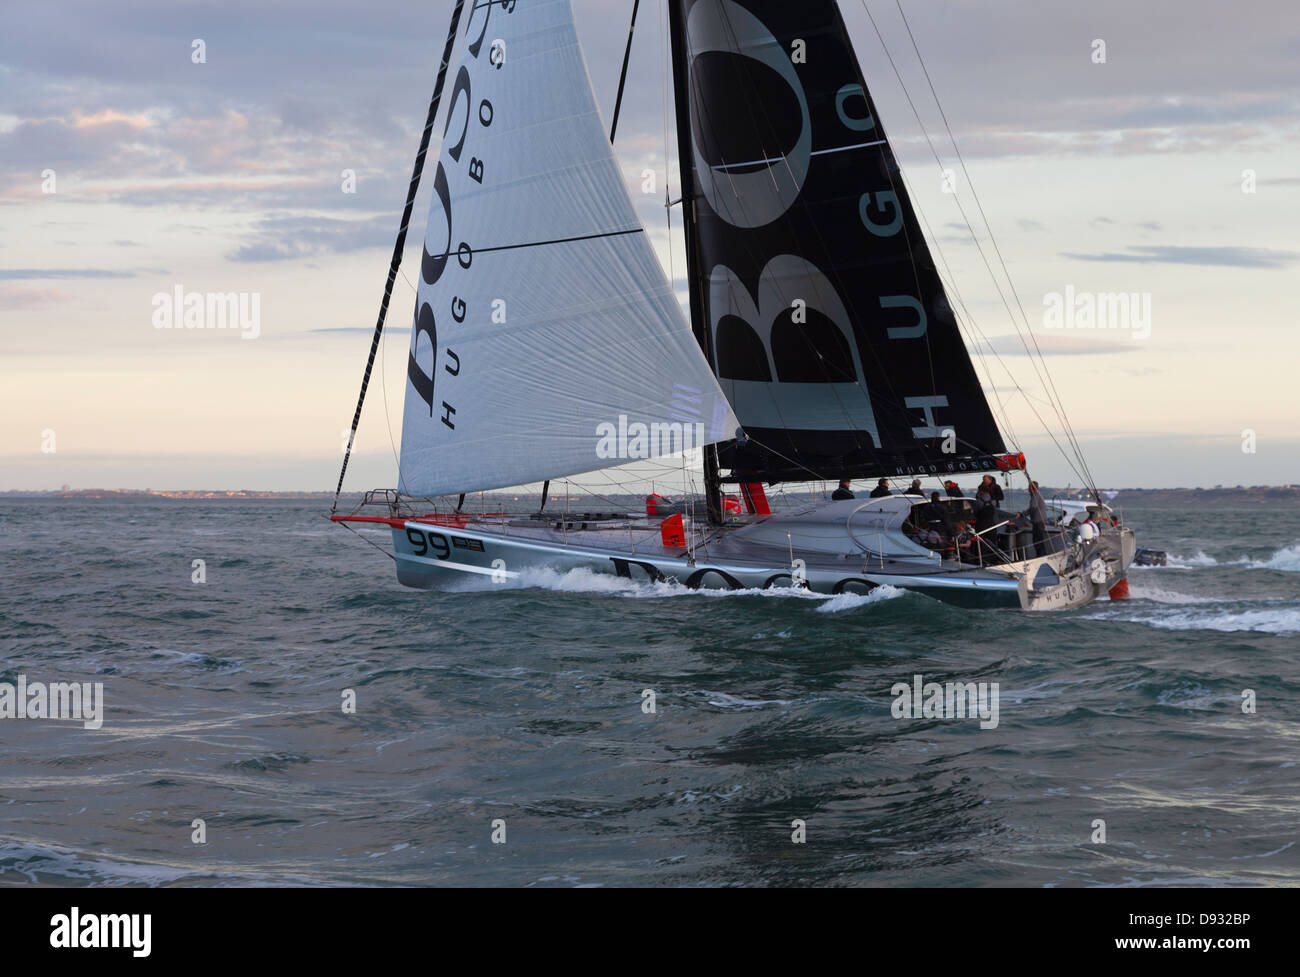 Alex Thomson Racing an Open 60 monohull in a Farr-designed race boat Stock Photo